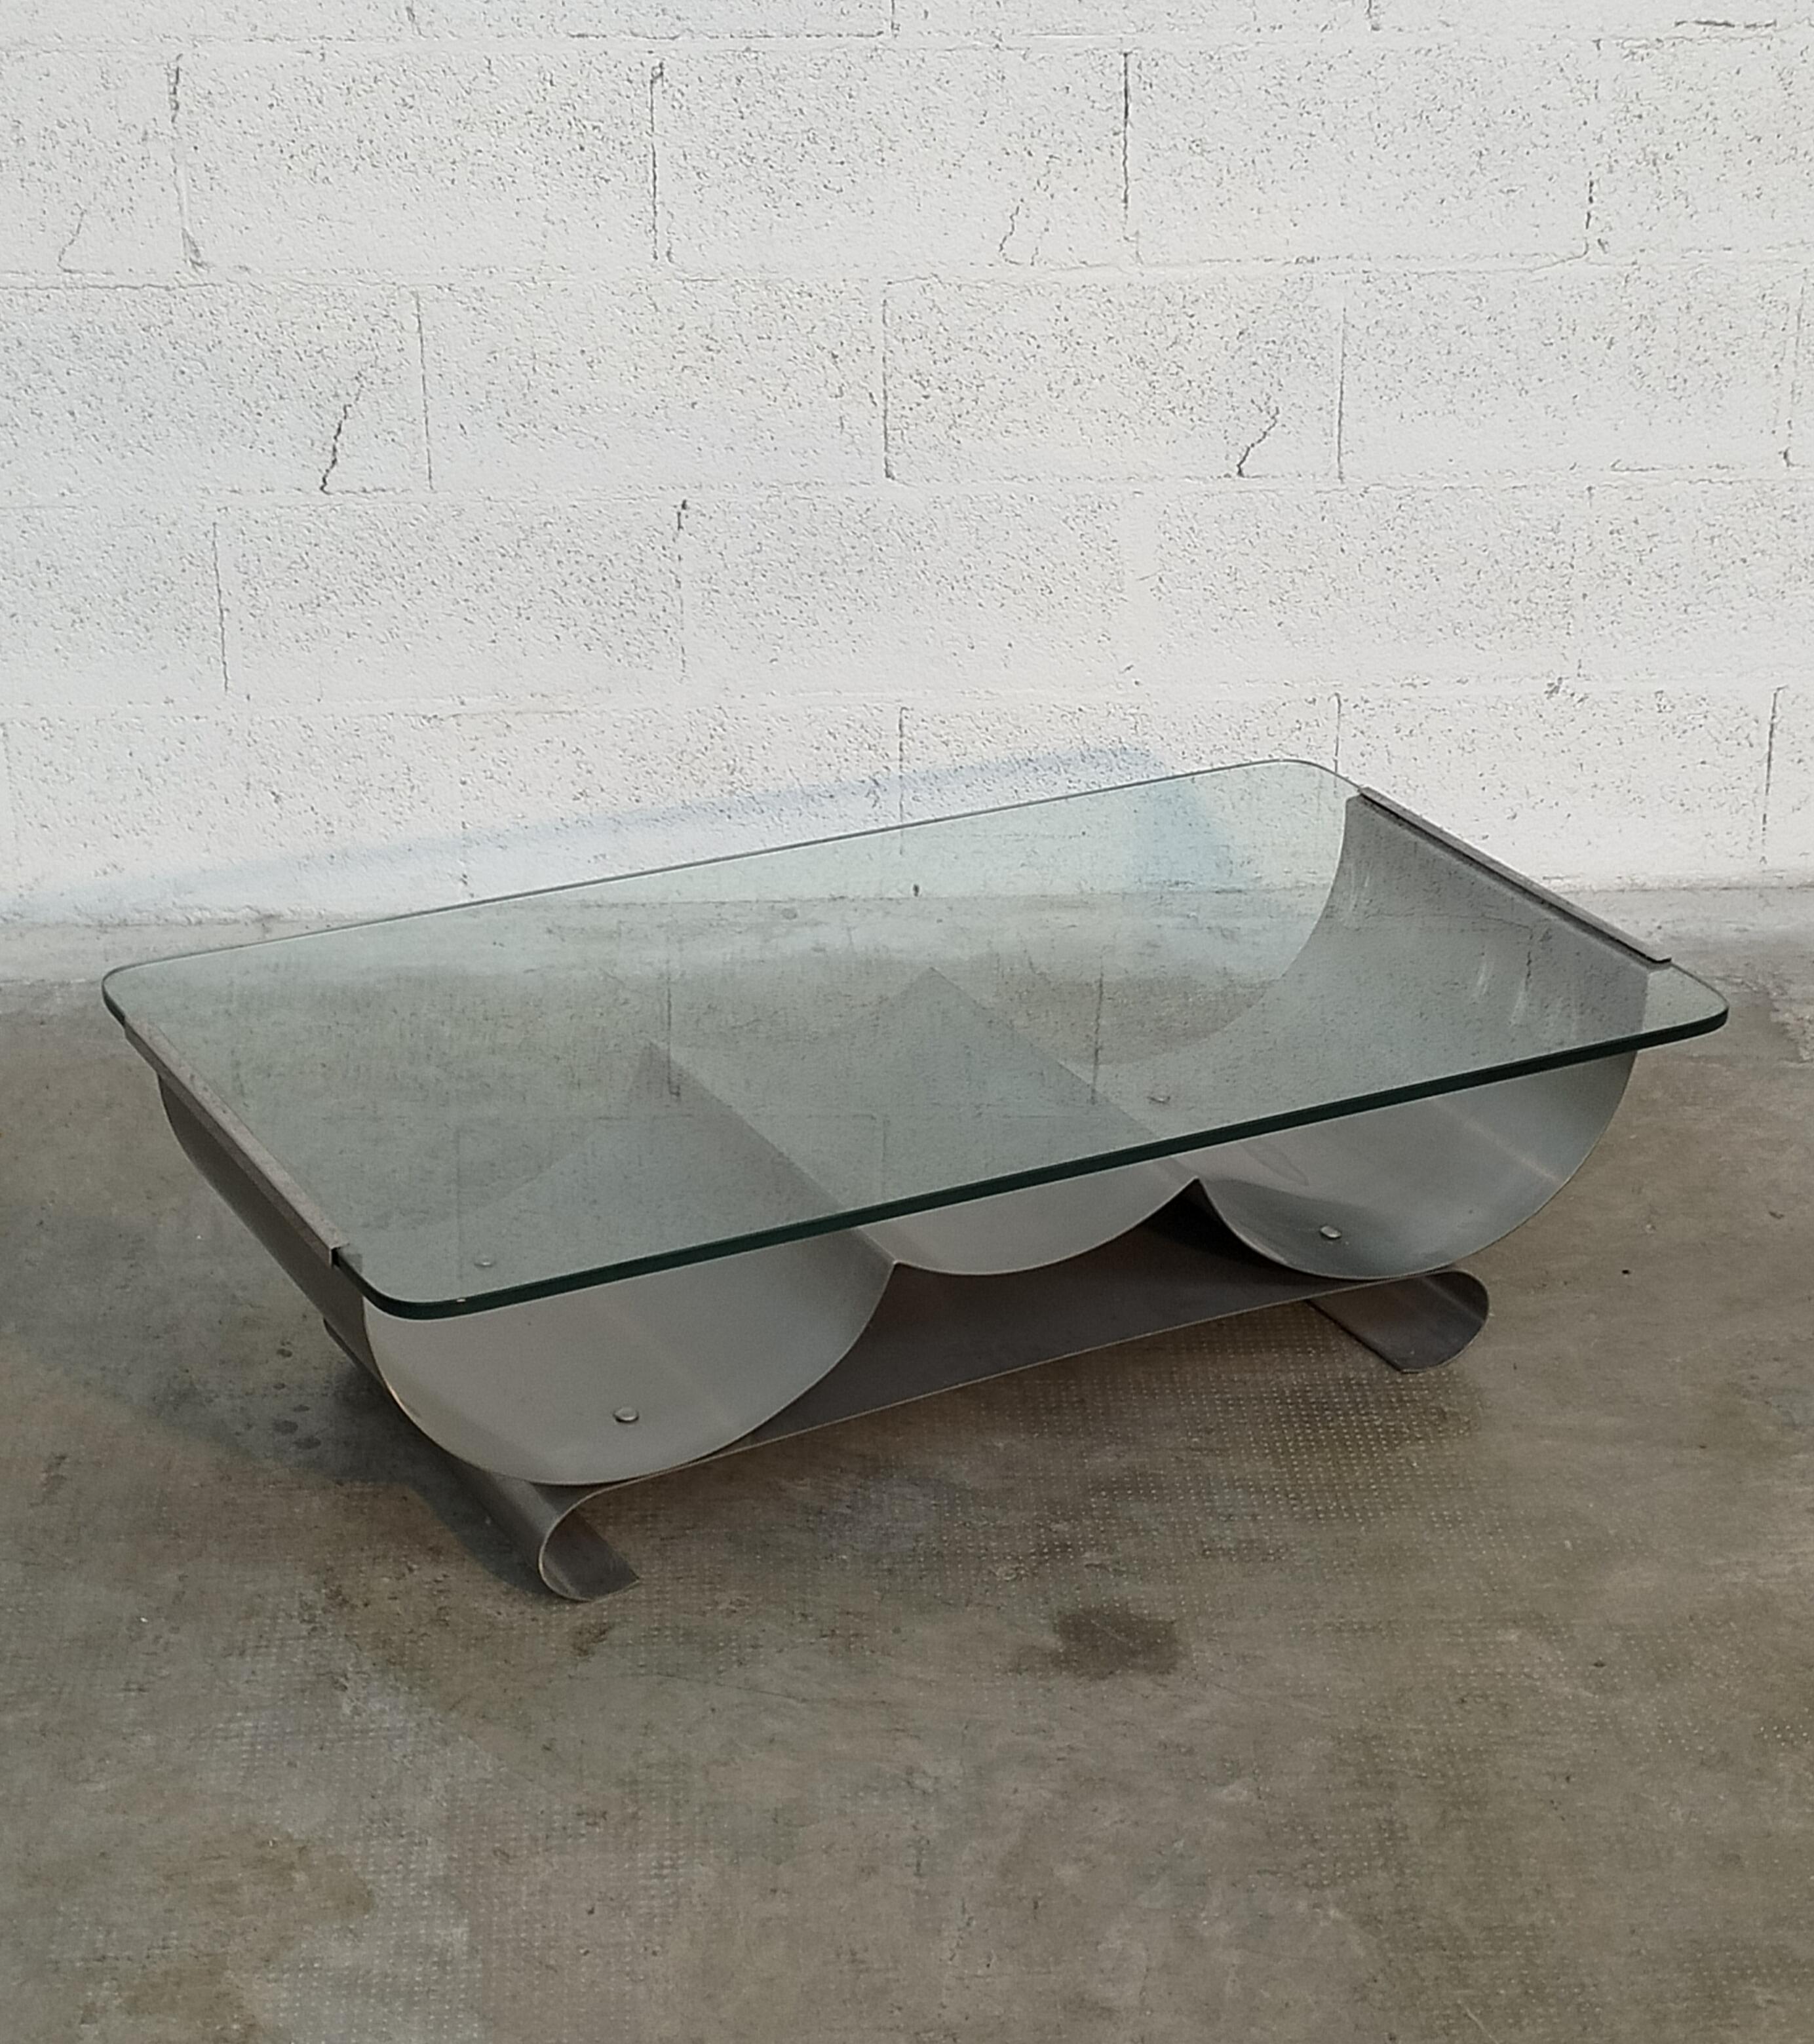 Late 20th Century Stainless Steel and Glass Coffee Table by Francois Monnet for Kappa 70s